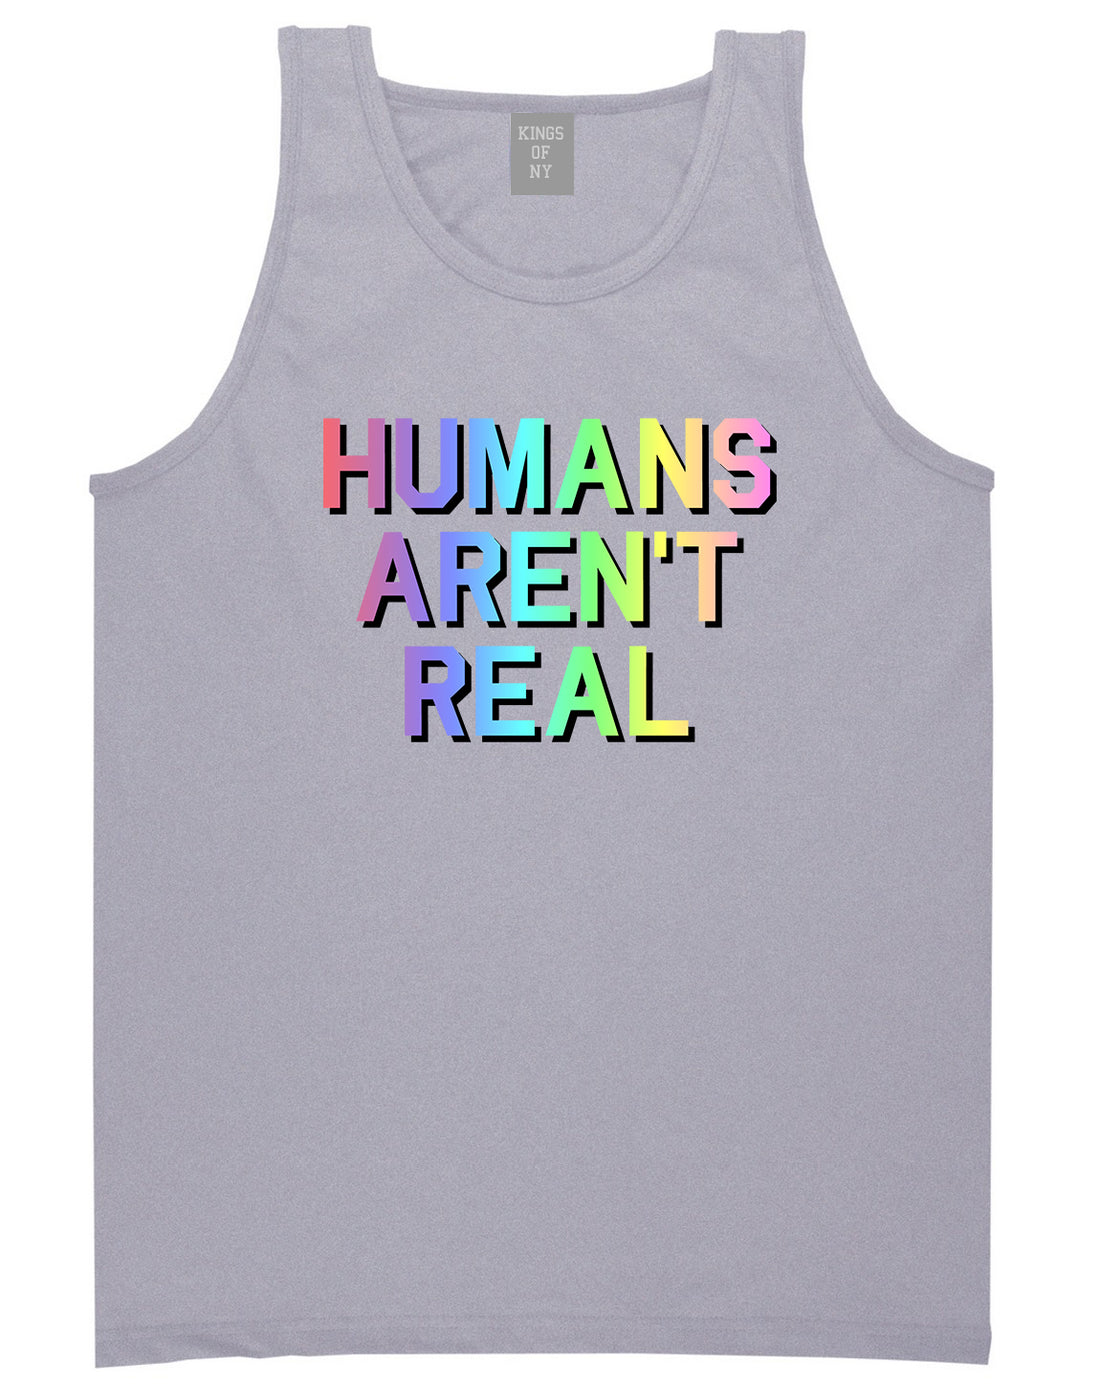 Humans Arent Real Tie Dye Hippie Rave Mens Tank Top T-Shirt Grey